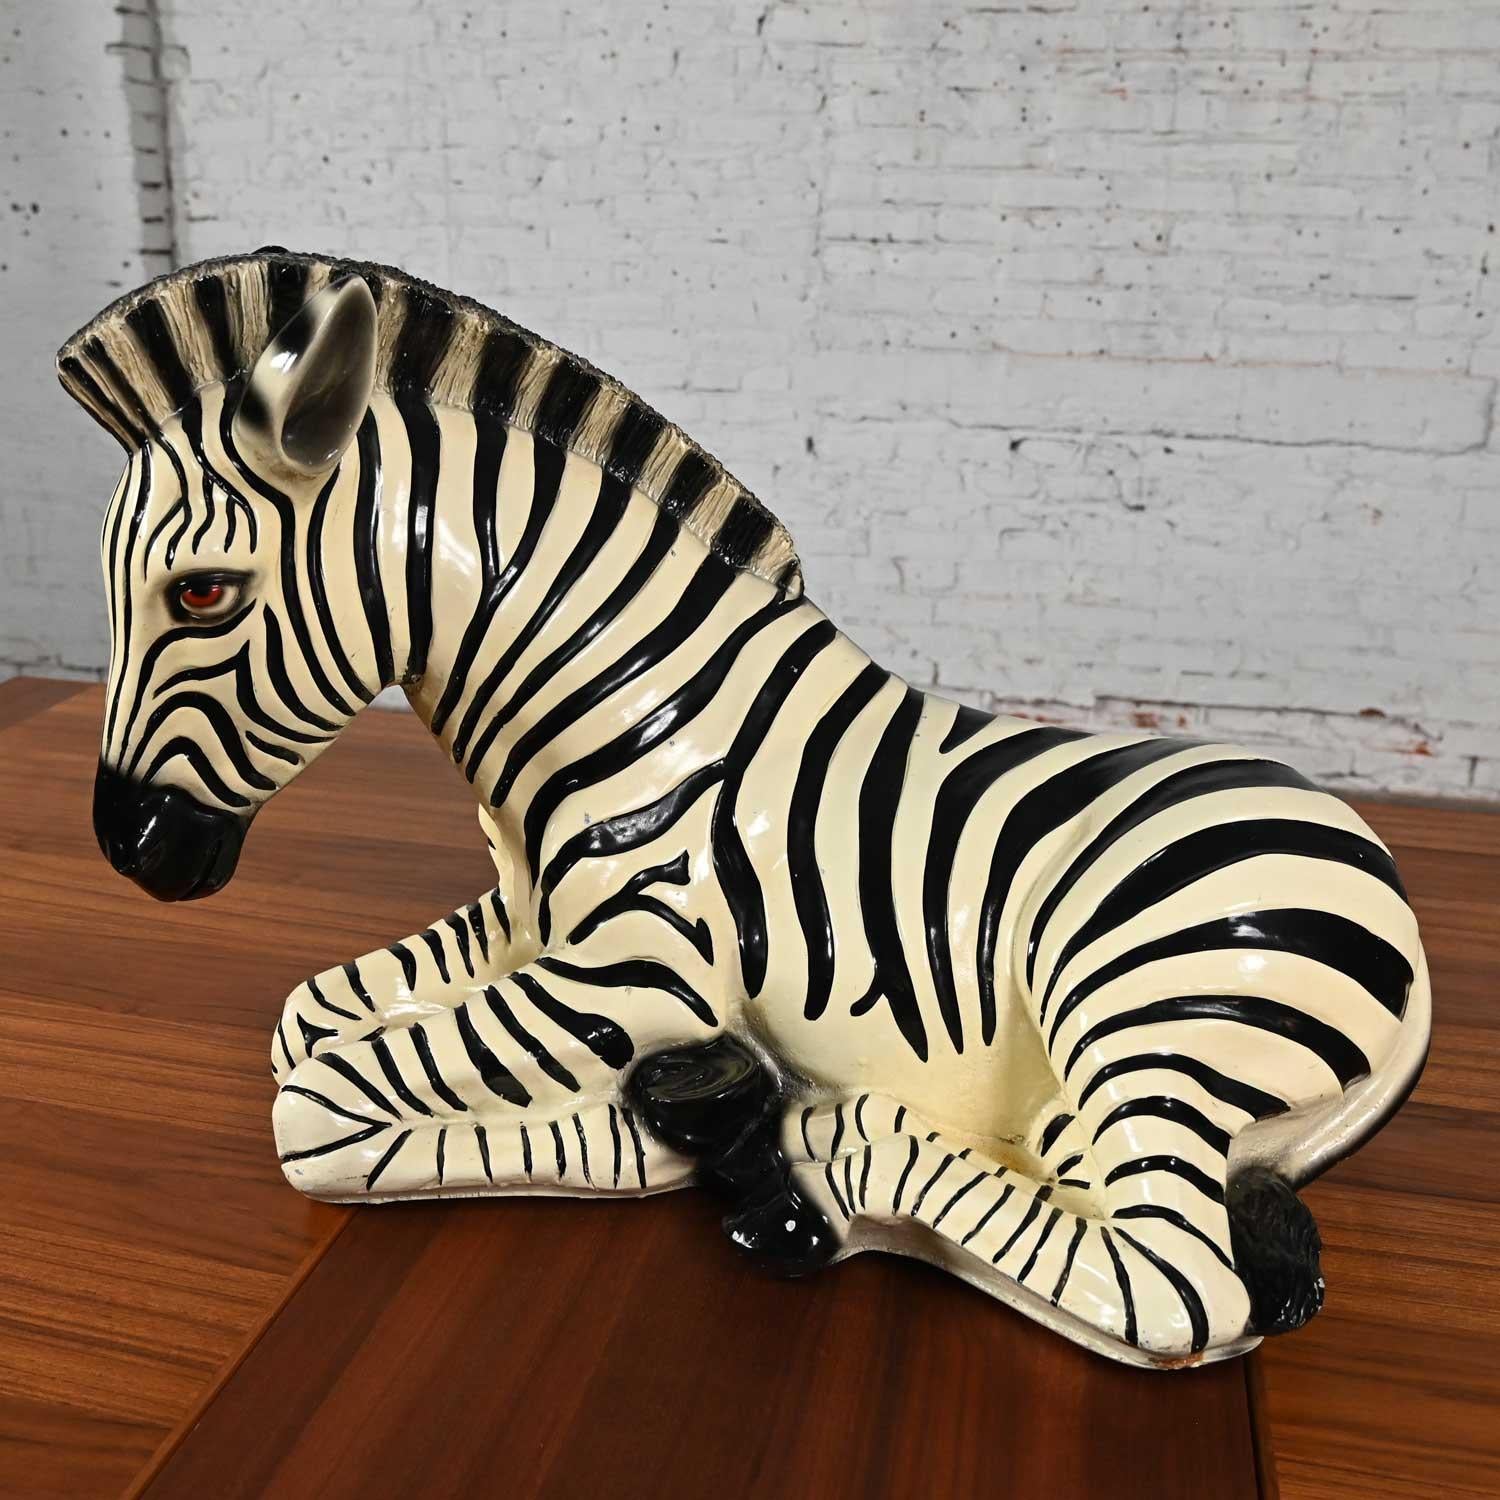 1970s Marwal Industries Large Scale Zebra Molded Resin Statue or Sculpture In Good Condition For Sale In Topeka, KS